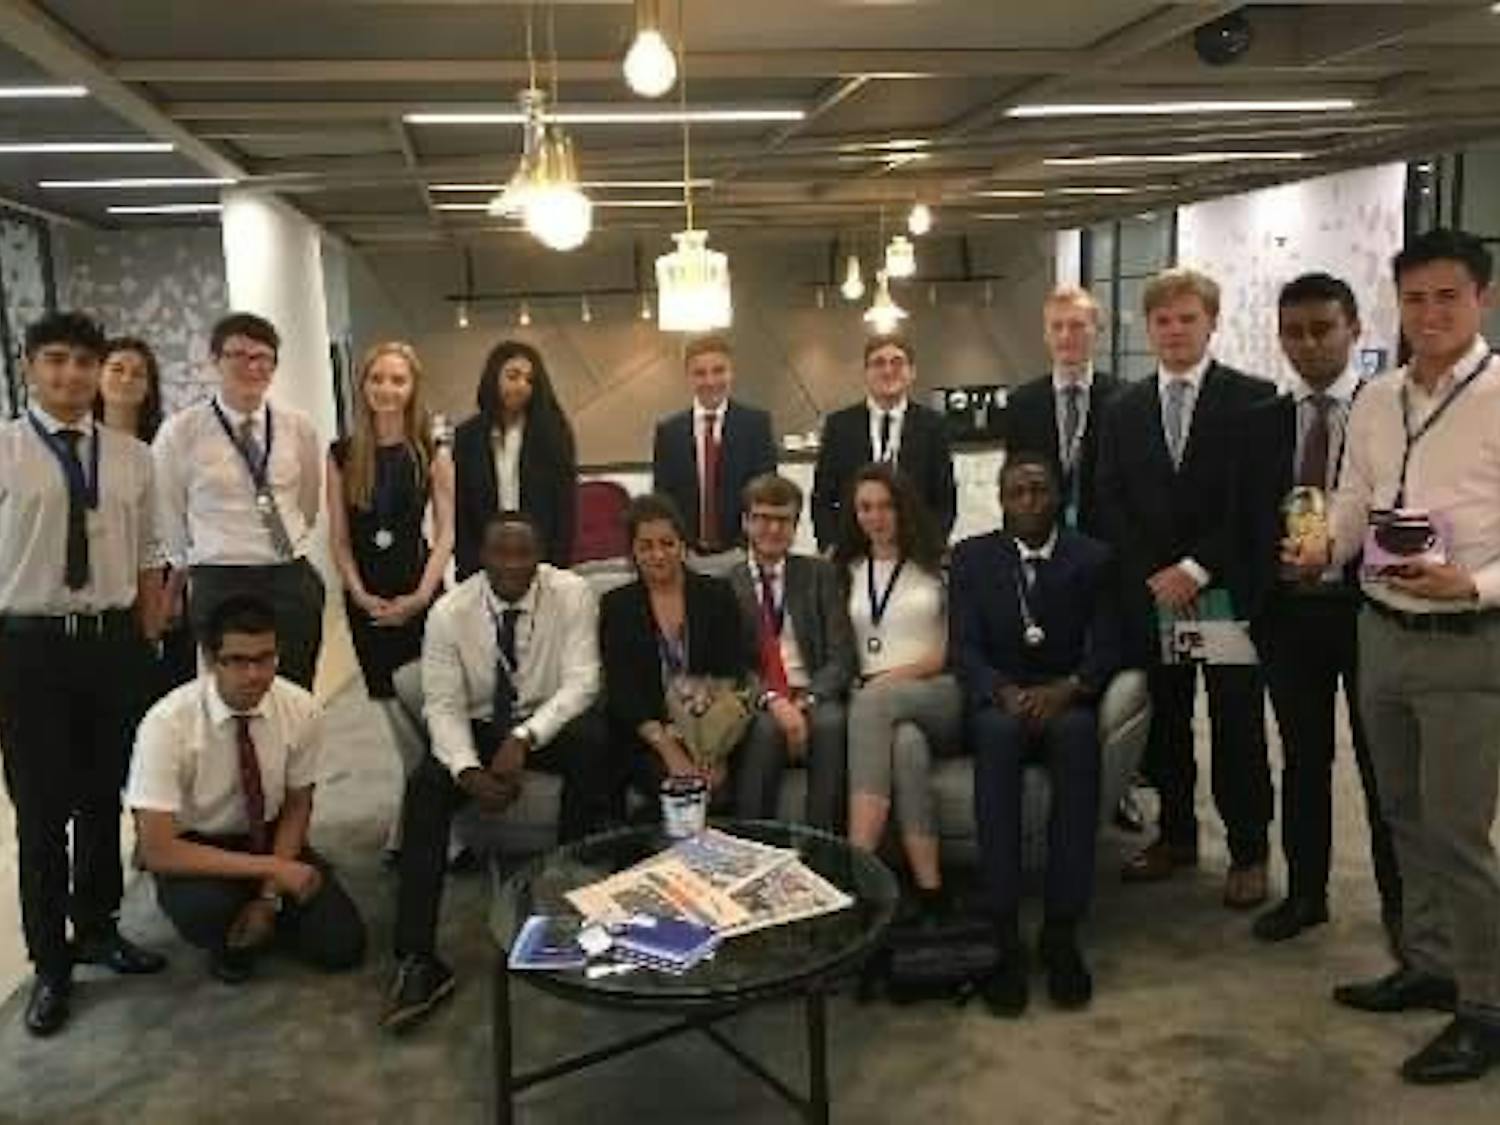 Summer interns at the company KPMG. Photo courtesy of Lucy-Rose Dyson.